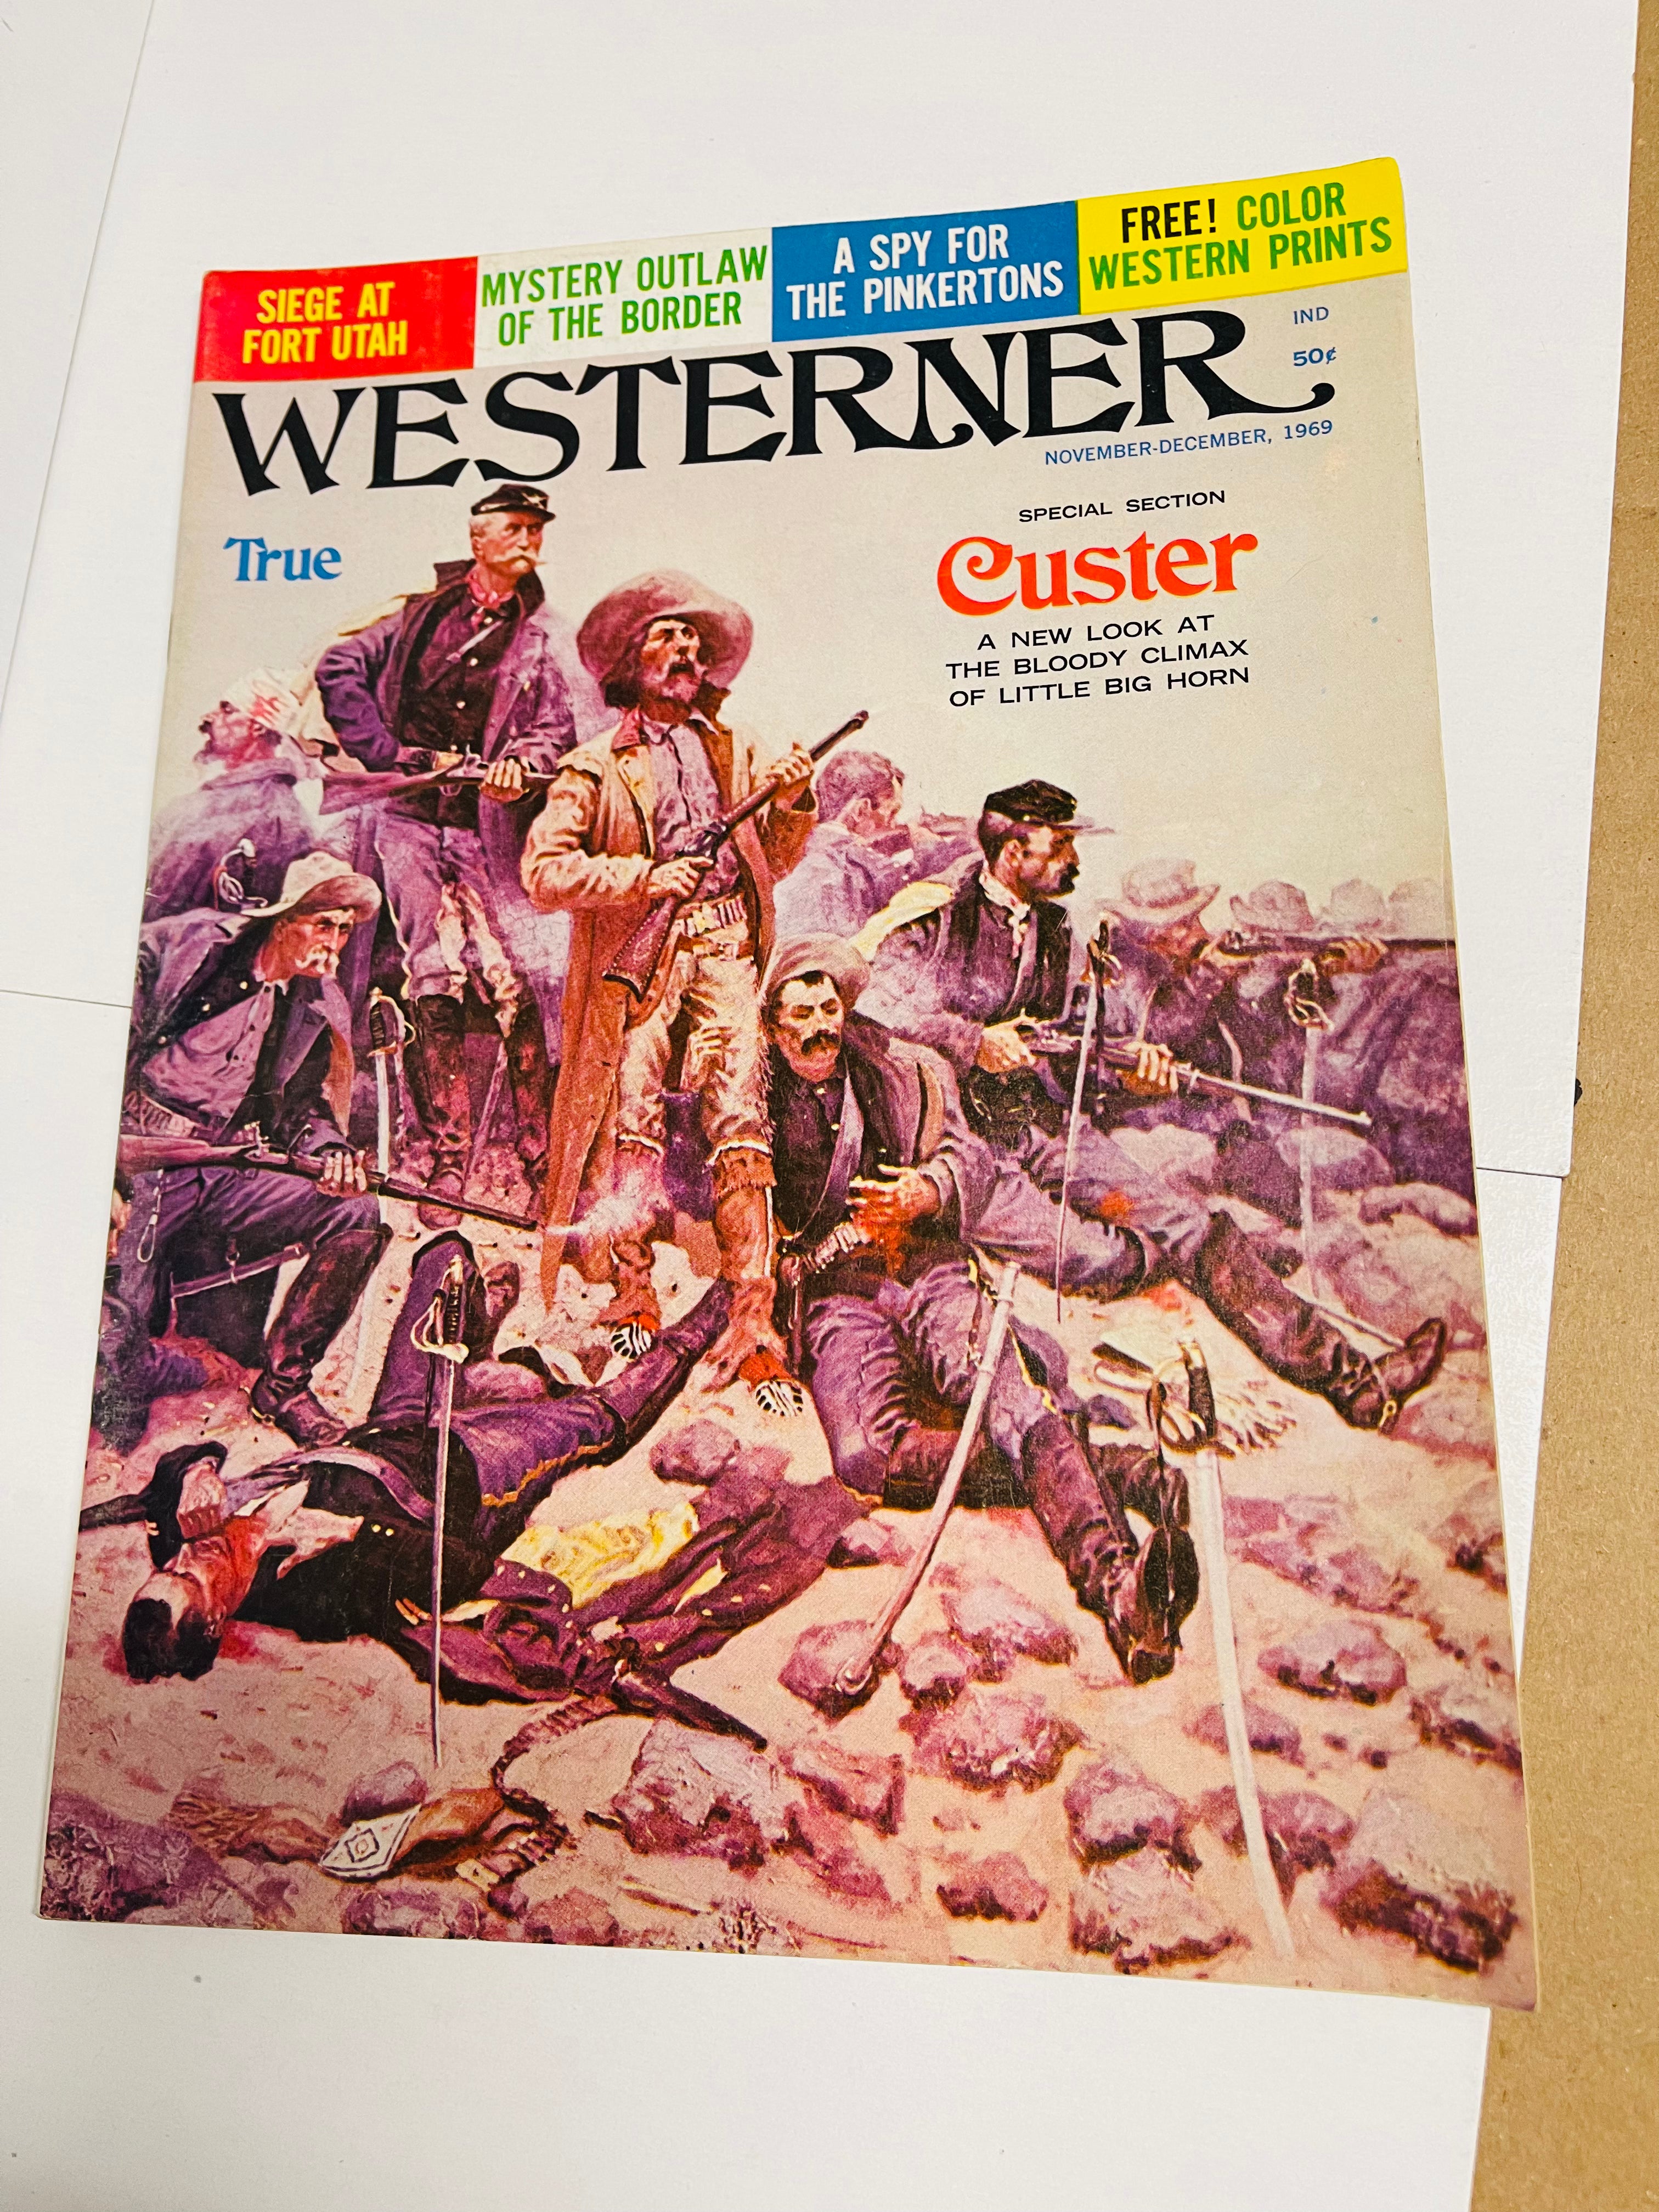 Westerner #5 magazine with Custer 1969